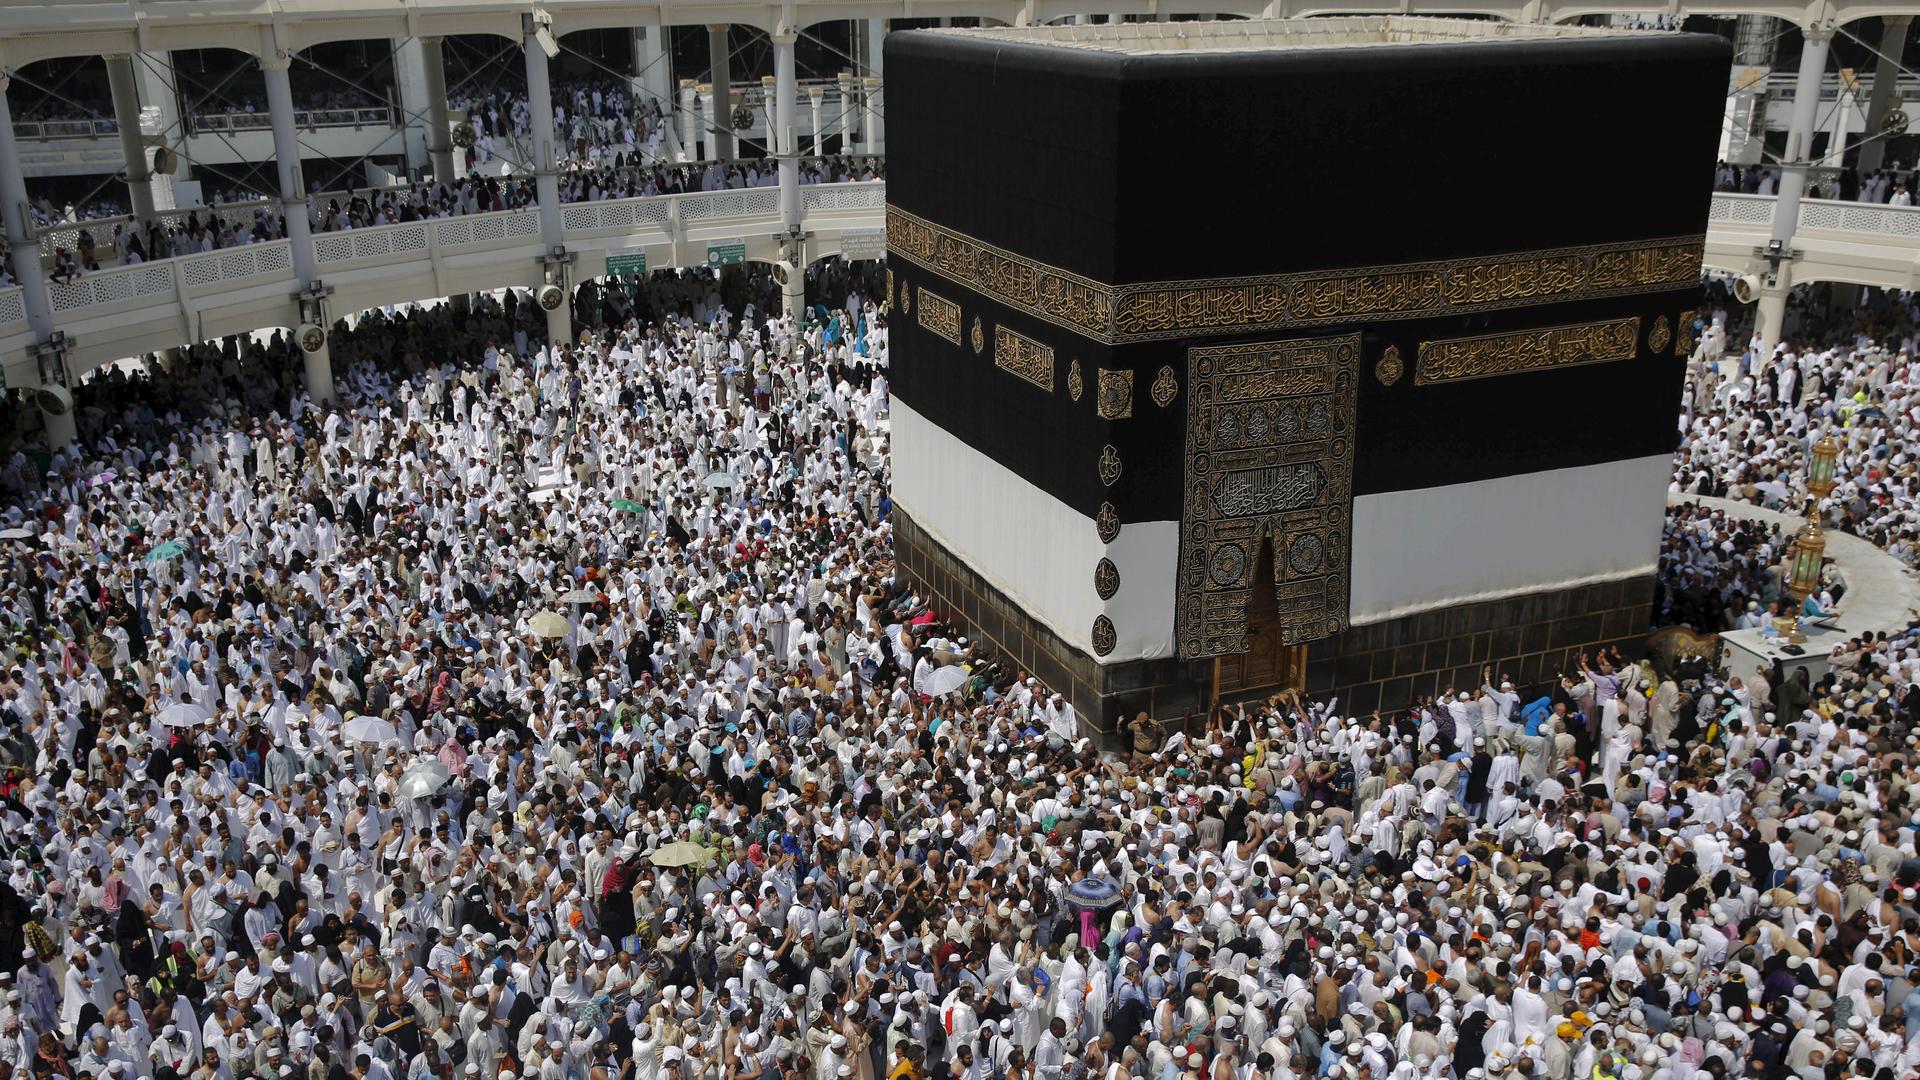 Muslim pilgrims pray around the holy Kaaba at the Grand Mosque ahead of the annual Hajj pilgrimage in Mecca.